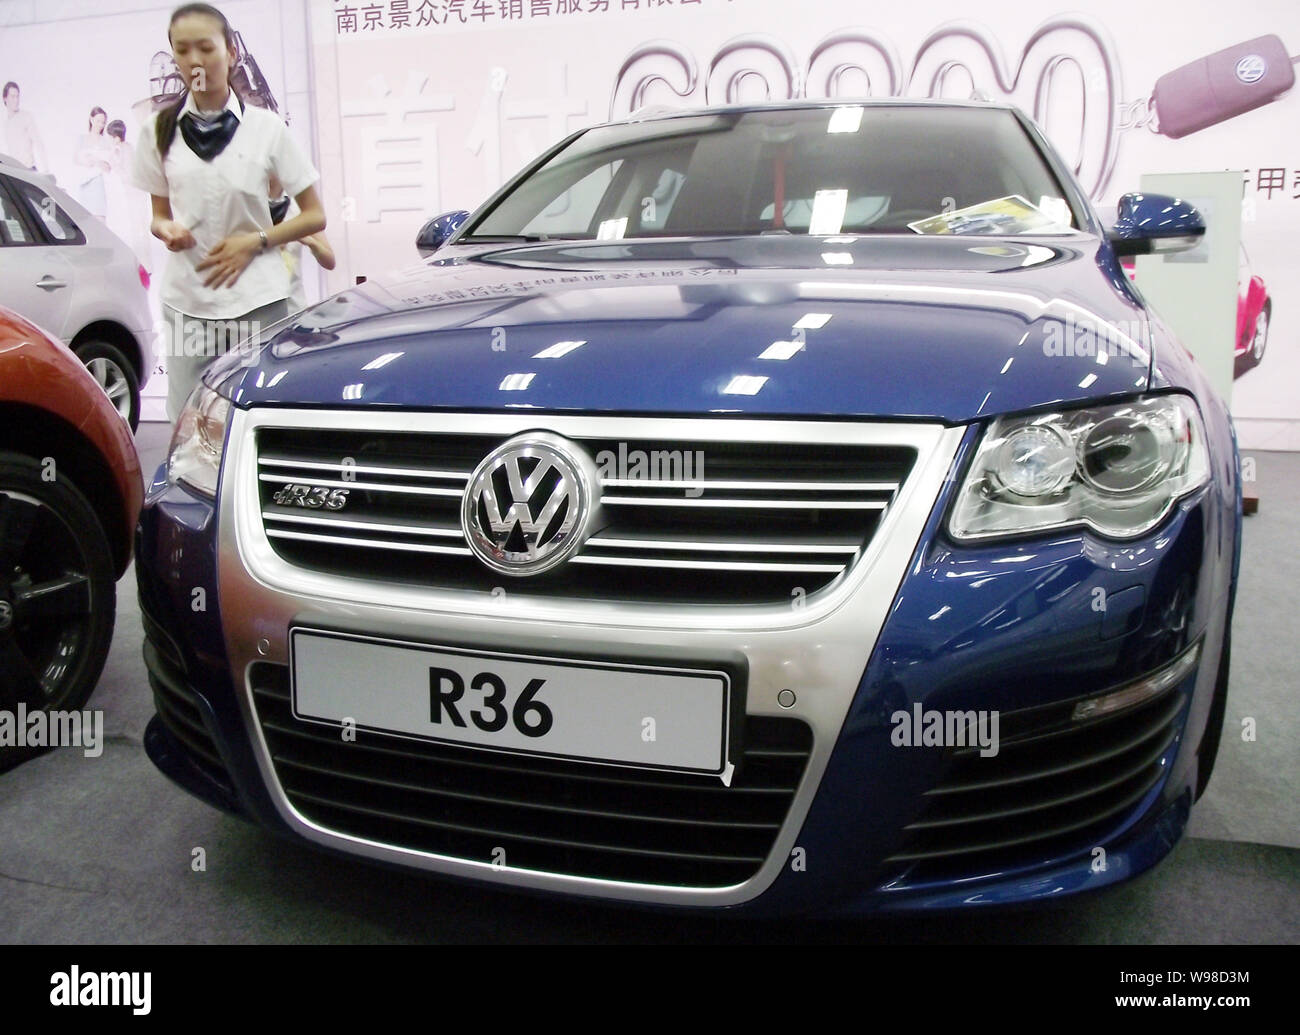 FILE--Chinese staff stand next to a Volkswagen R36 during an auto show in  Nanjing city, east Chinas Jiangsu province, 28 August 2010. German carma  Stock Photo - Alamy